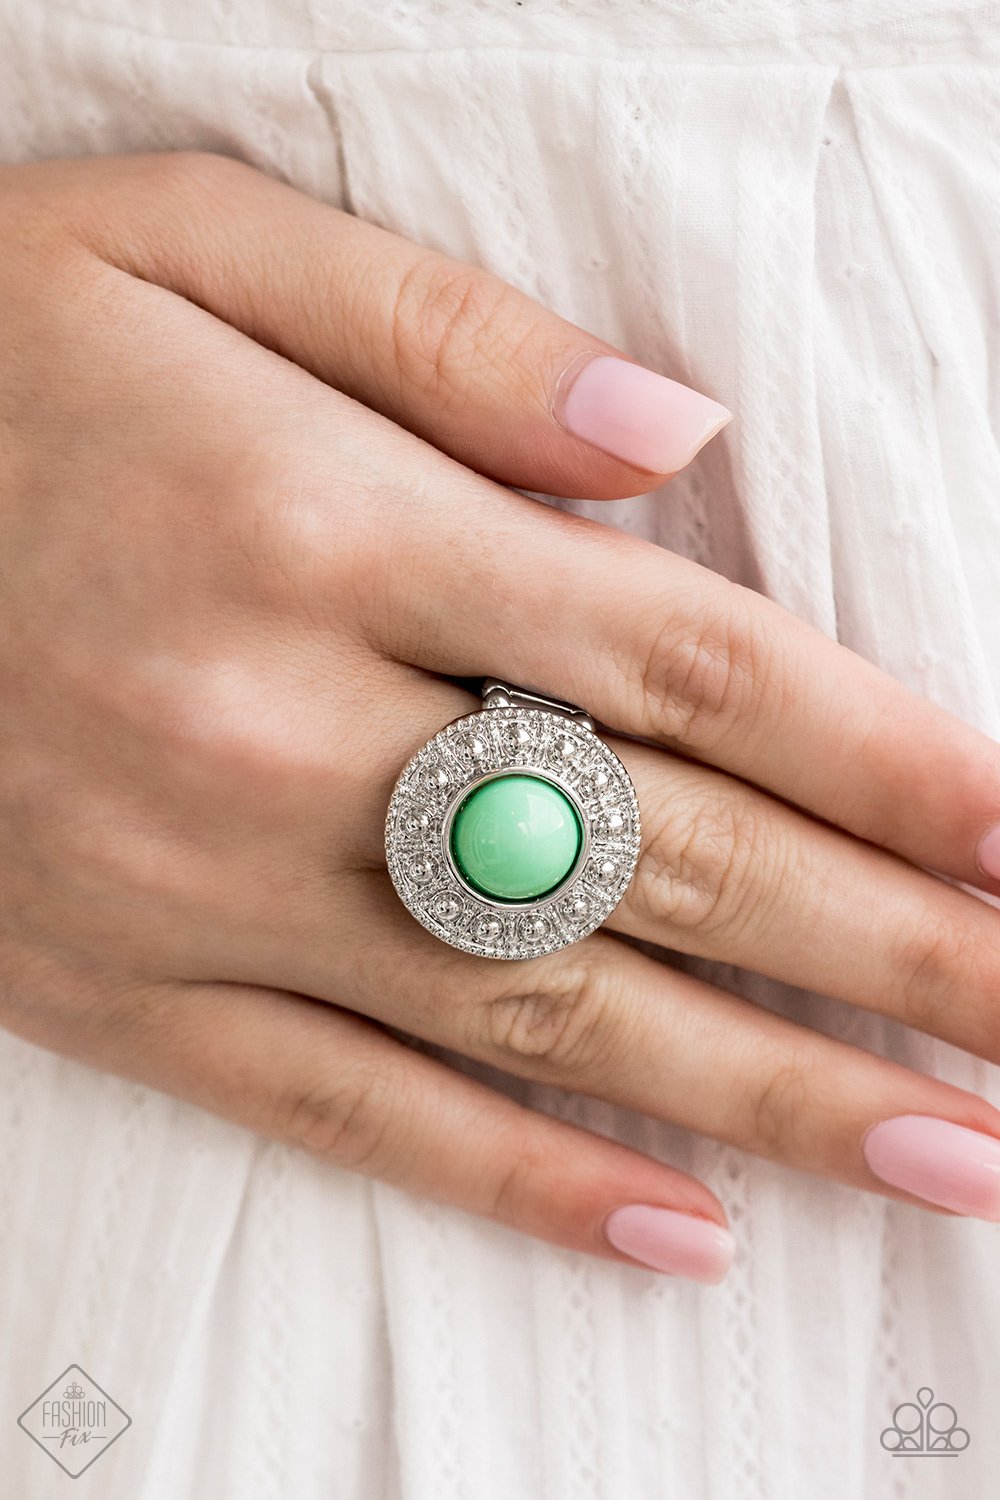 Treasure Chest Shimmer-green-Paparazzi ring